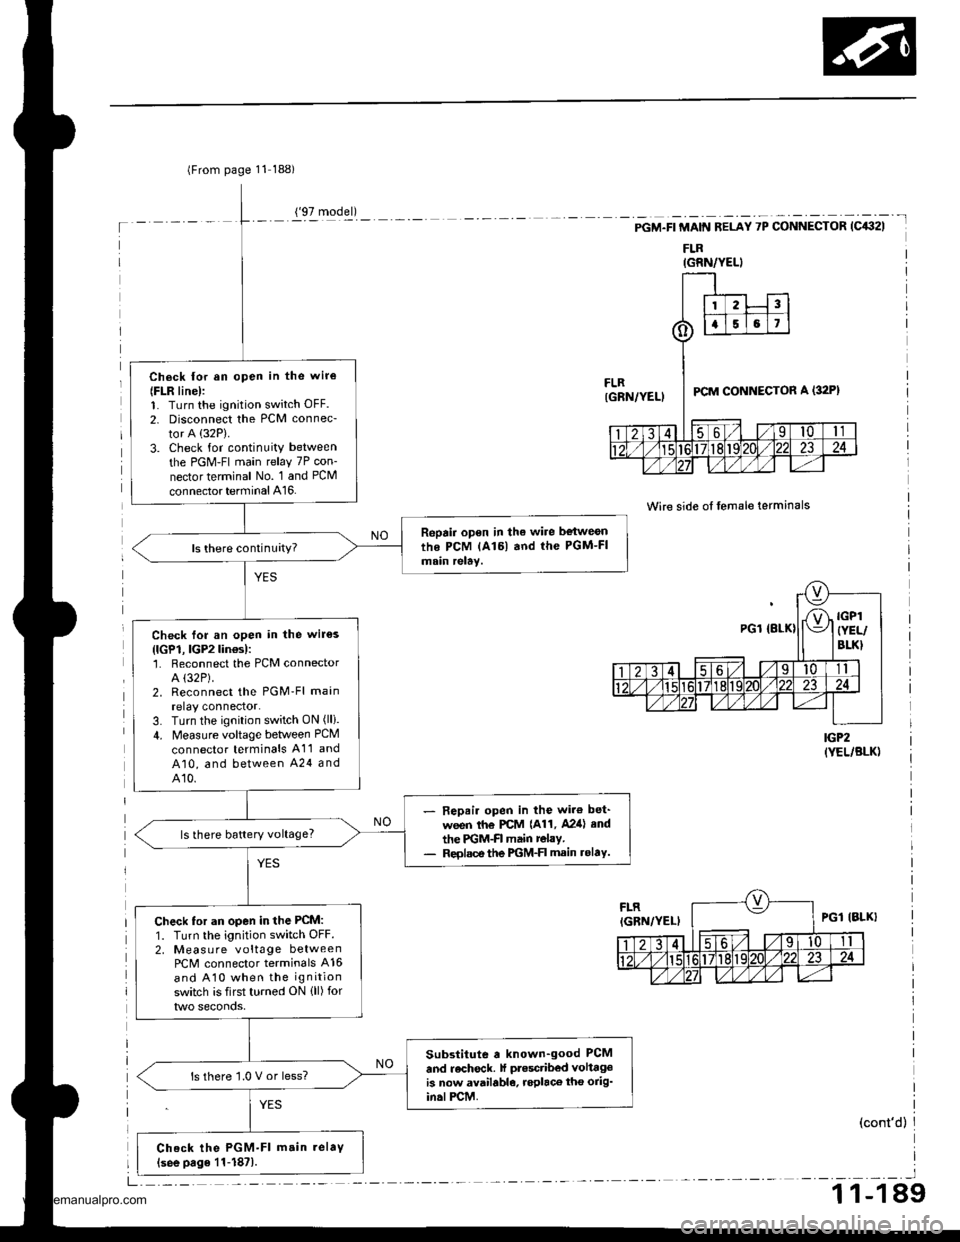 HONDA CR-V 1998 RD1-RD3 / 1.G Service Manual 
lFrom page 11 188)
Ch6ck lor an open in the wir€
{FLR line):1. Turn the ignition switch OFF.
2. Disconnect the PCM connec-
tor A (32P).
3. Check for continuity between
the PGM-FI main relay 7P con-